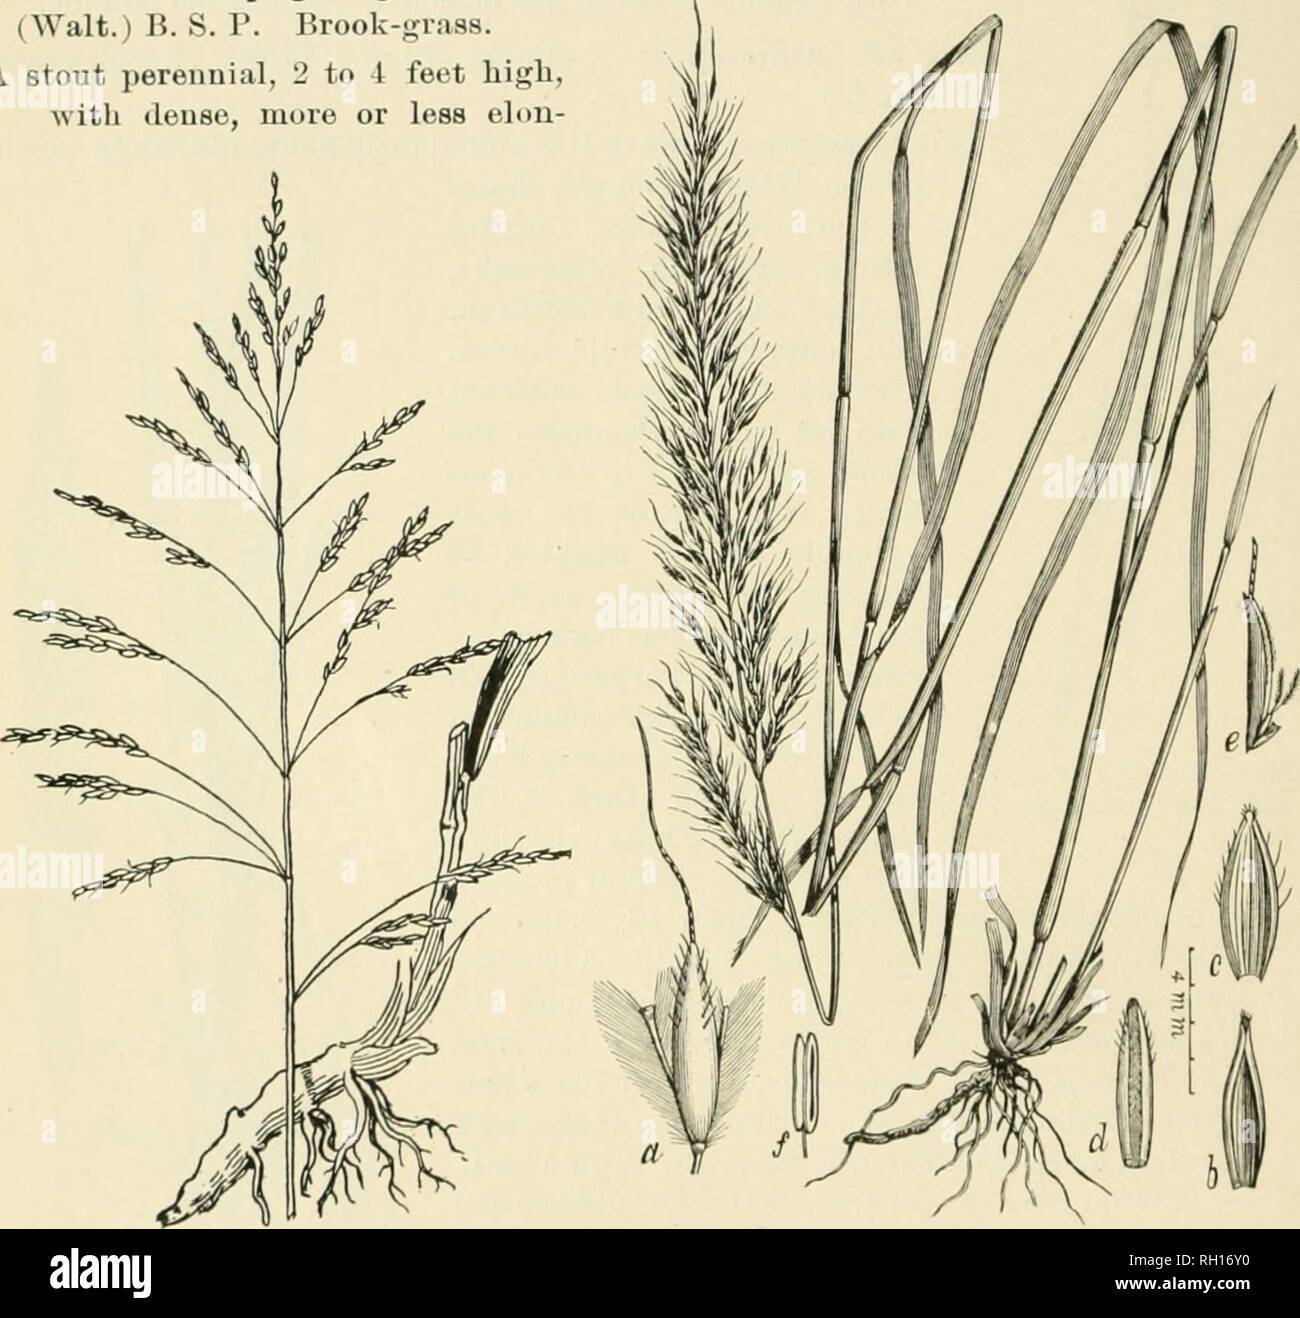 . Bulletin. Gramineae -- United States; Forage plants -- United States. 12 No. 19. Andropogon contortus Linn. Twisted Beard-grass. A stout, leafy perennial, 1 to 3 feet liigb, aifording excellent grazing when young, but the mature seeds are much dreaded by sheep owners, as by their peculiar structure they not only become attached to and injure the wool, but often pene- trate the skin and even the intestines of these animals. The strong rhizomes and tough fibrous roots which this grass has, commend it as a soil binder for river banks, dams, etc. The awns indicate by their twisting the amount of Stock Photo